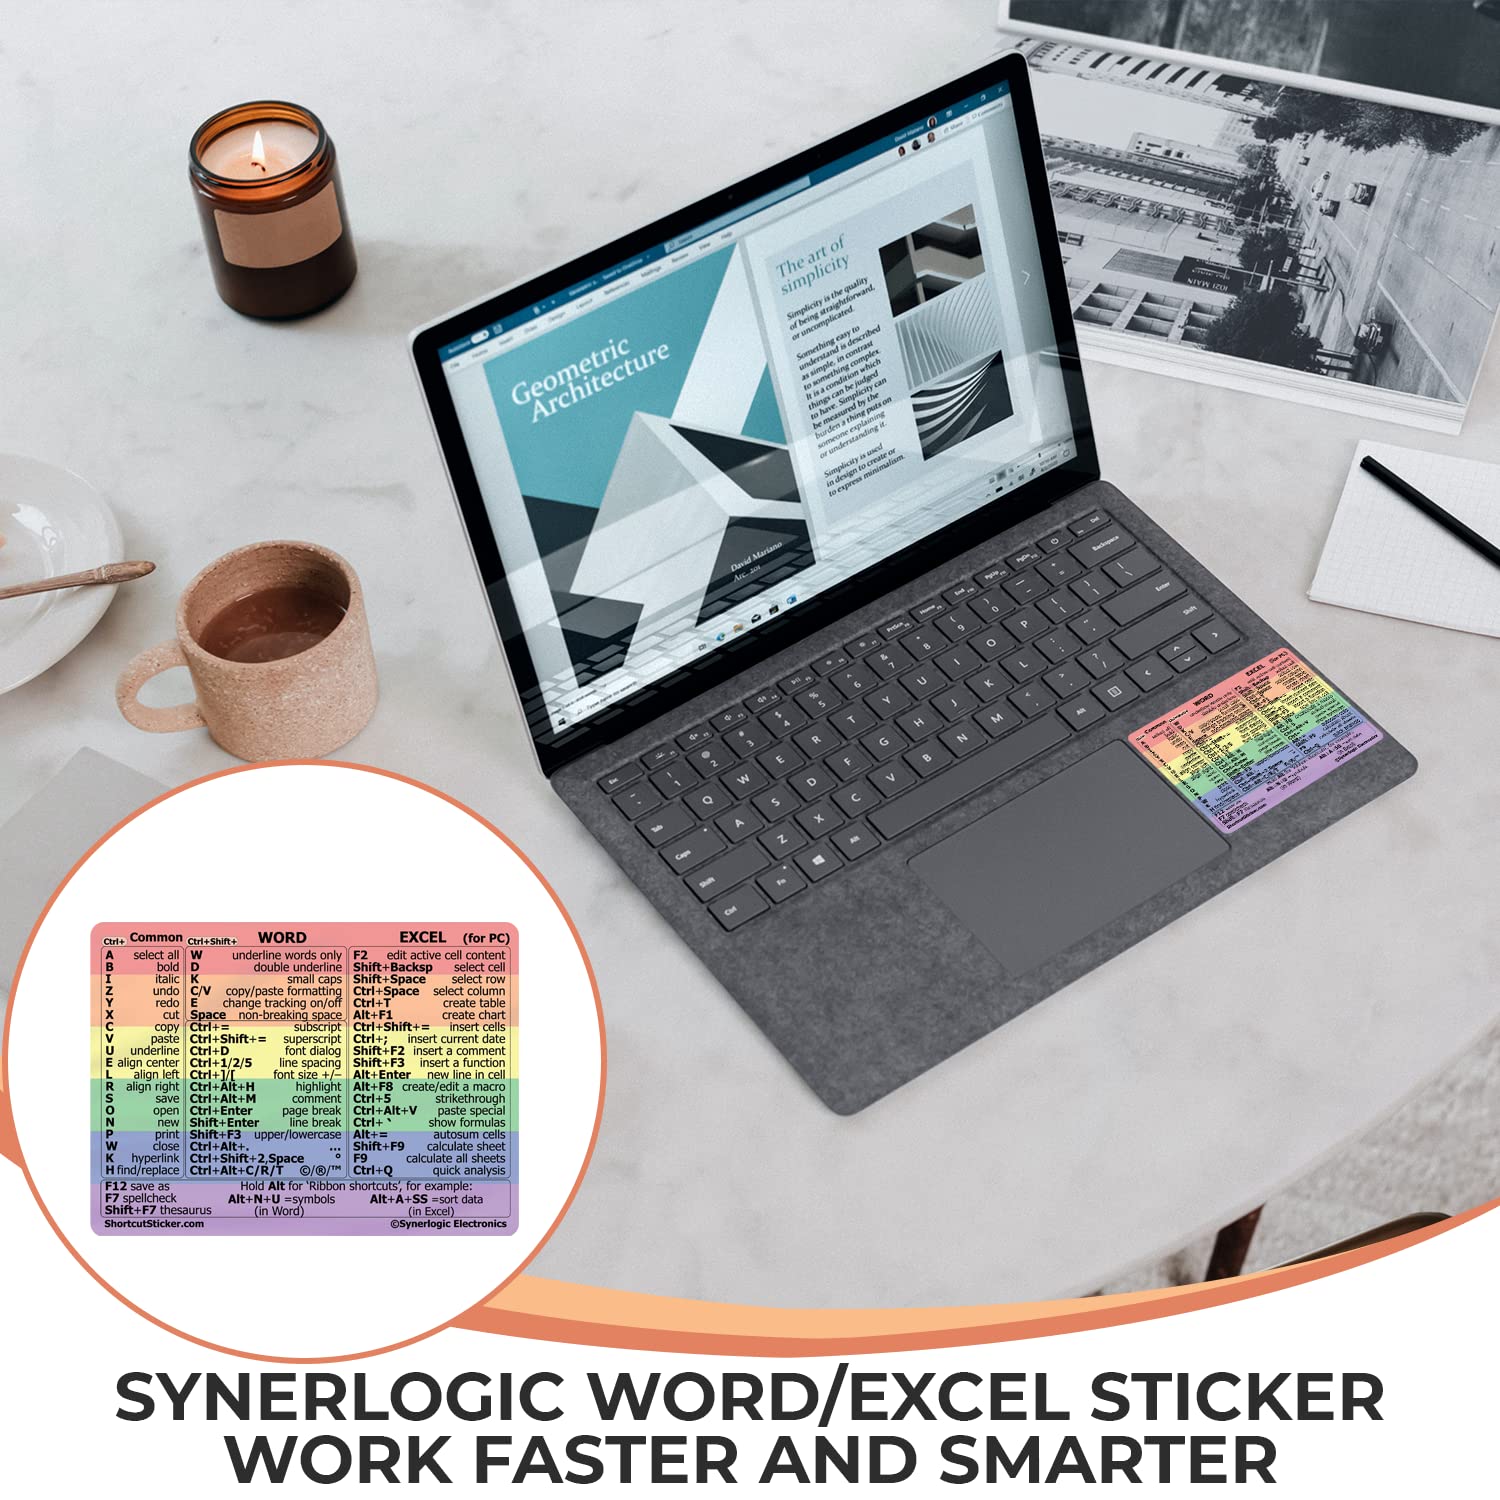 Synerlogic Microsoft Word Excel For Windows Reference Guide Keyboard Shortcut Sticker